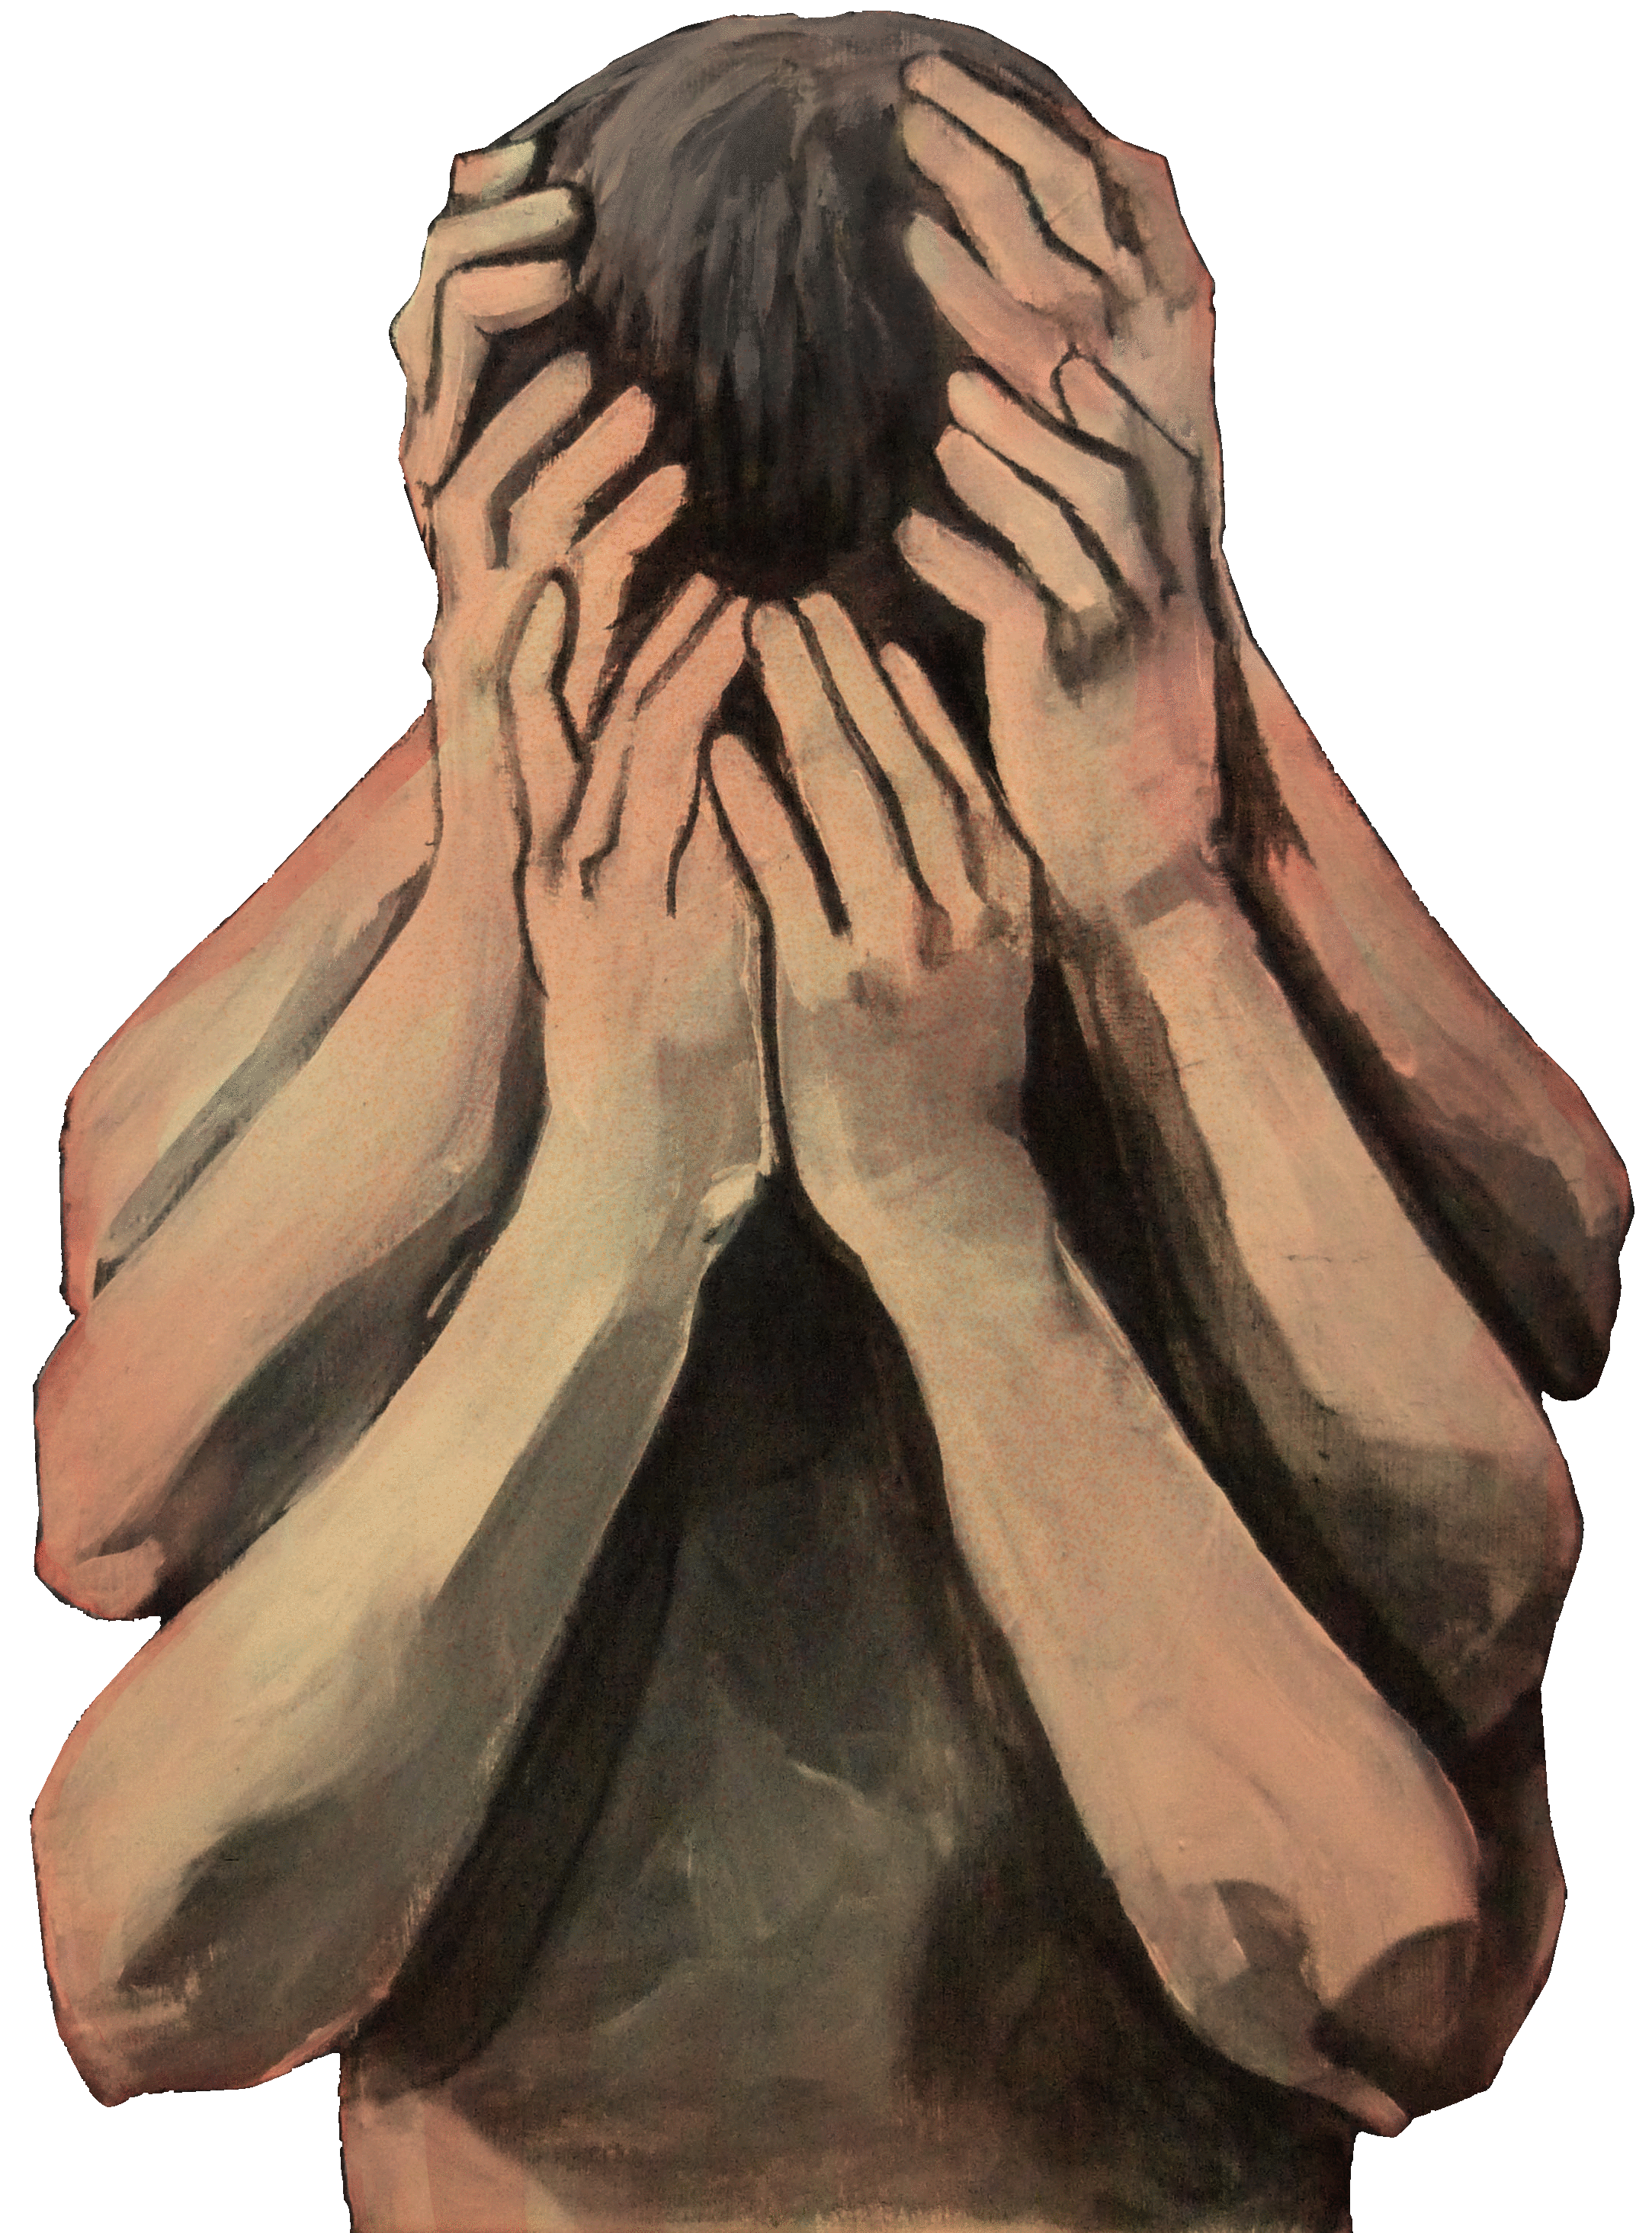 a person grabbing their face with many hands